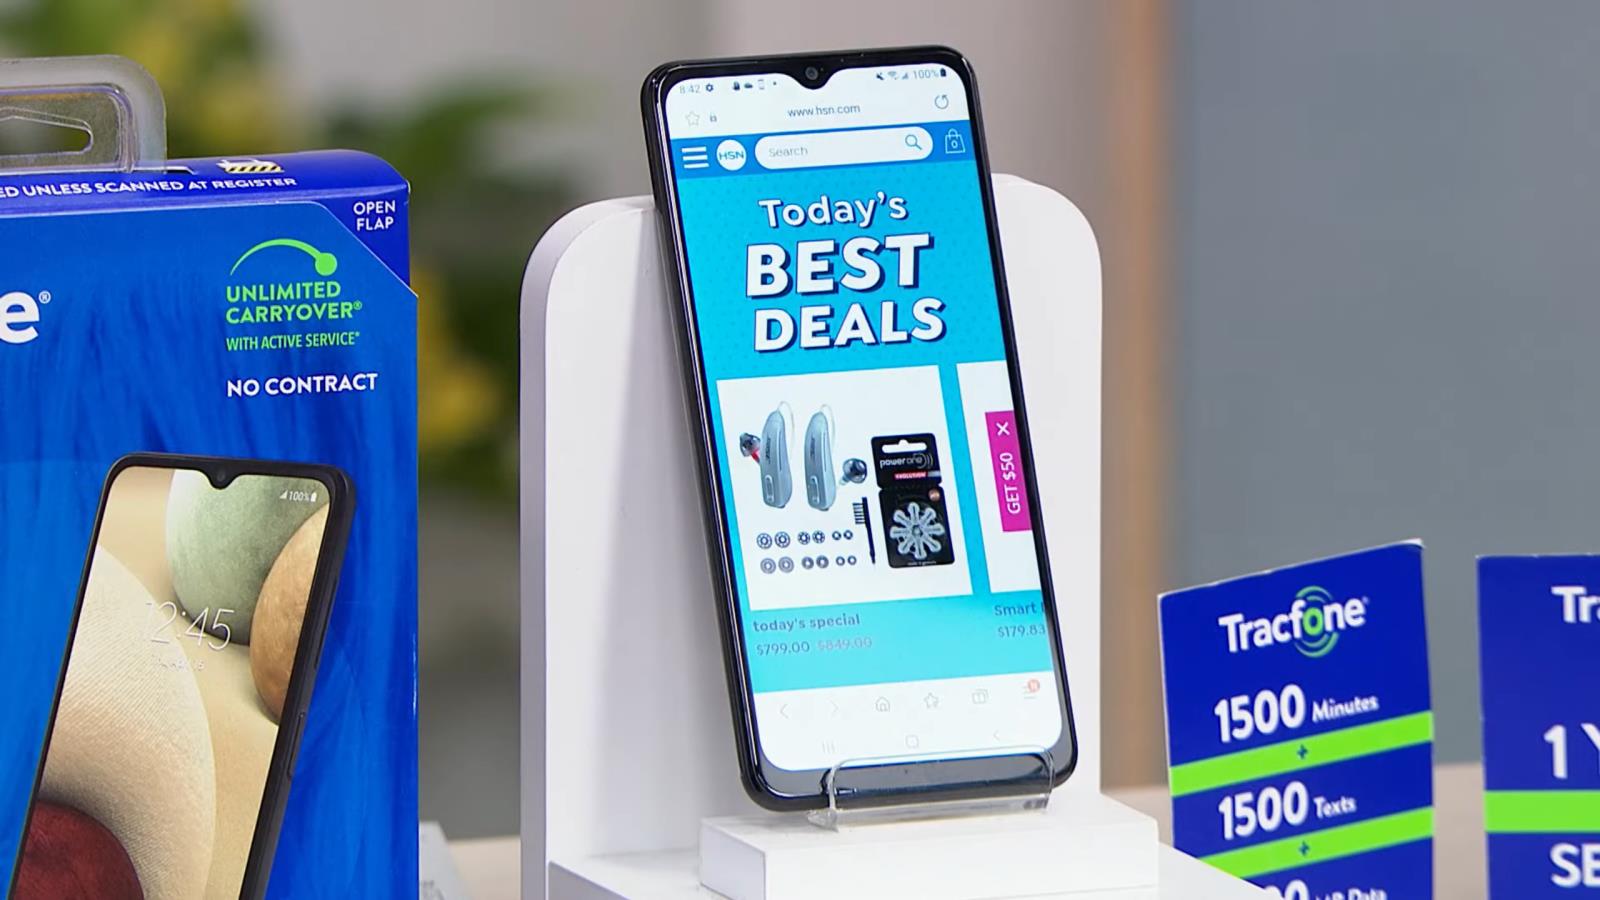 Tracfone HSN Phone With Plan Bundle Deals